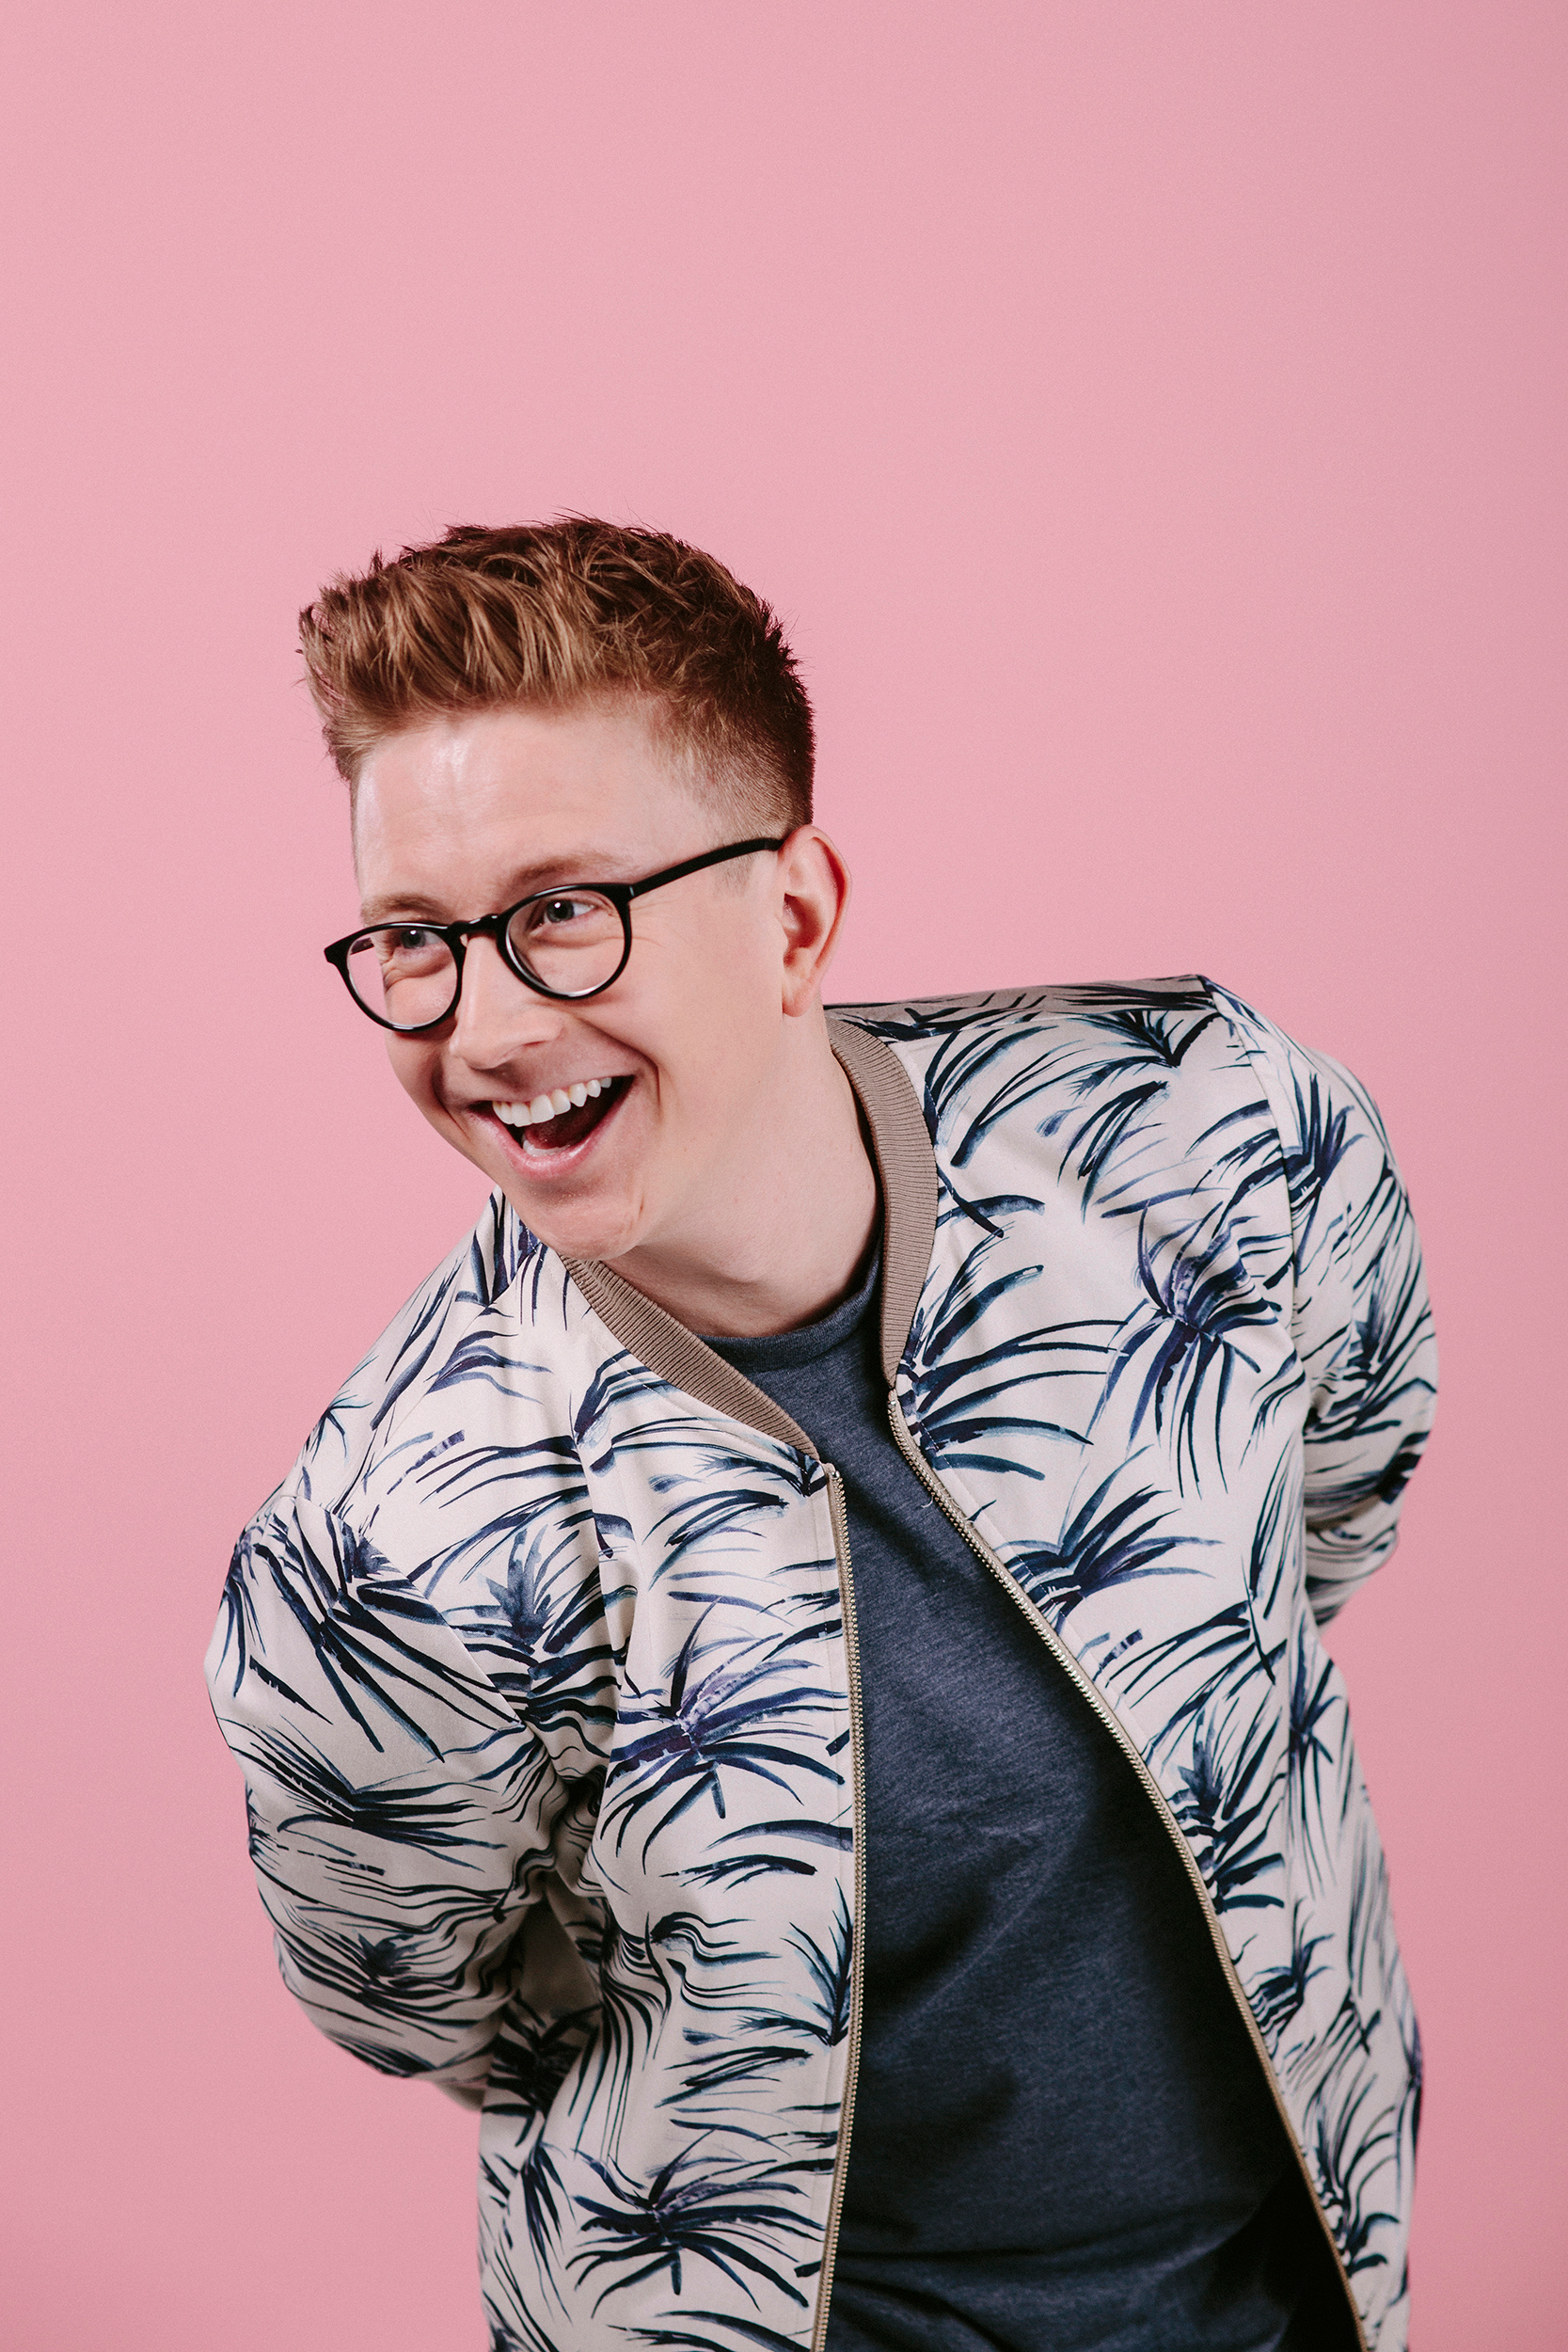 Tyler Oakley photographed for Time in Los Angeles on Feb. 8, 2017.